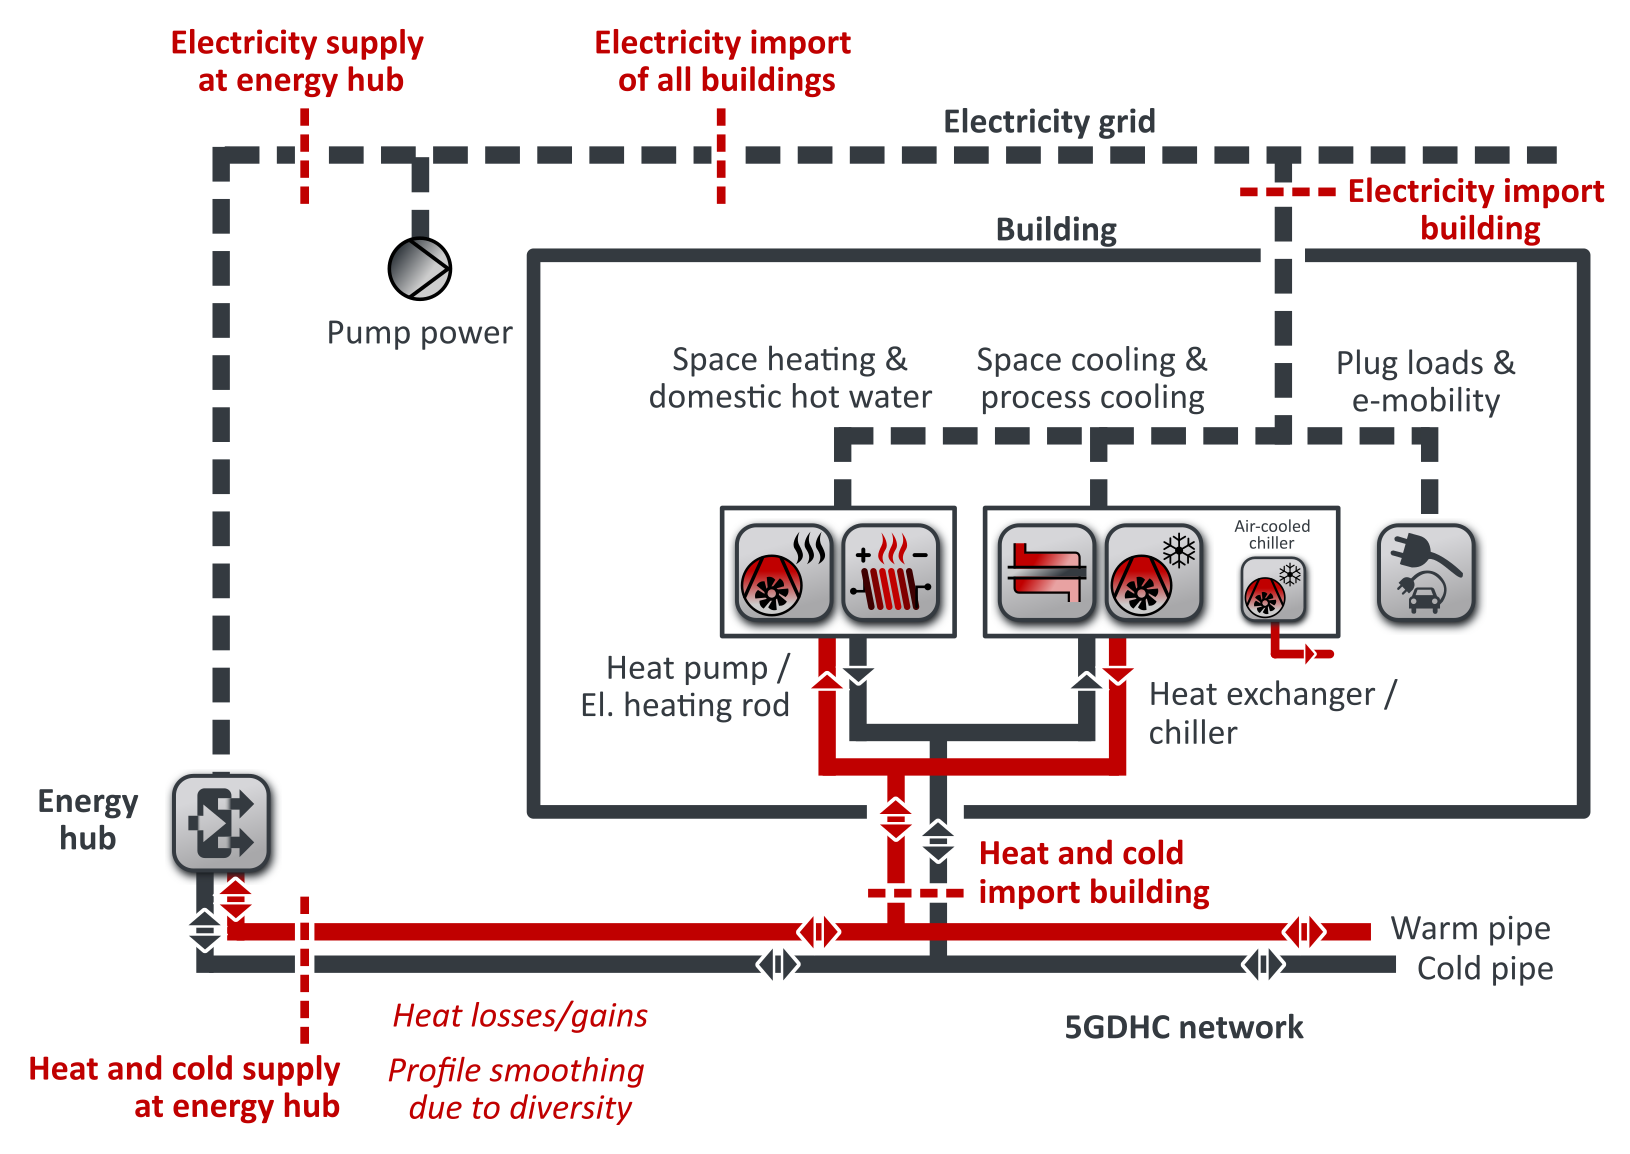 Energy flows in 5GDHC networks with heat pump and chiller